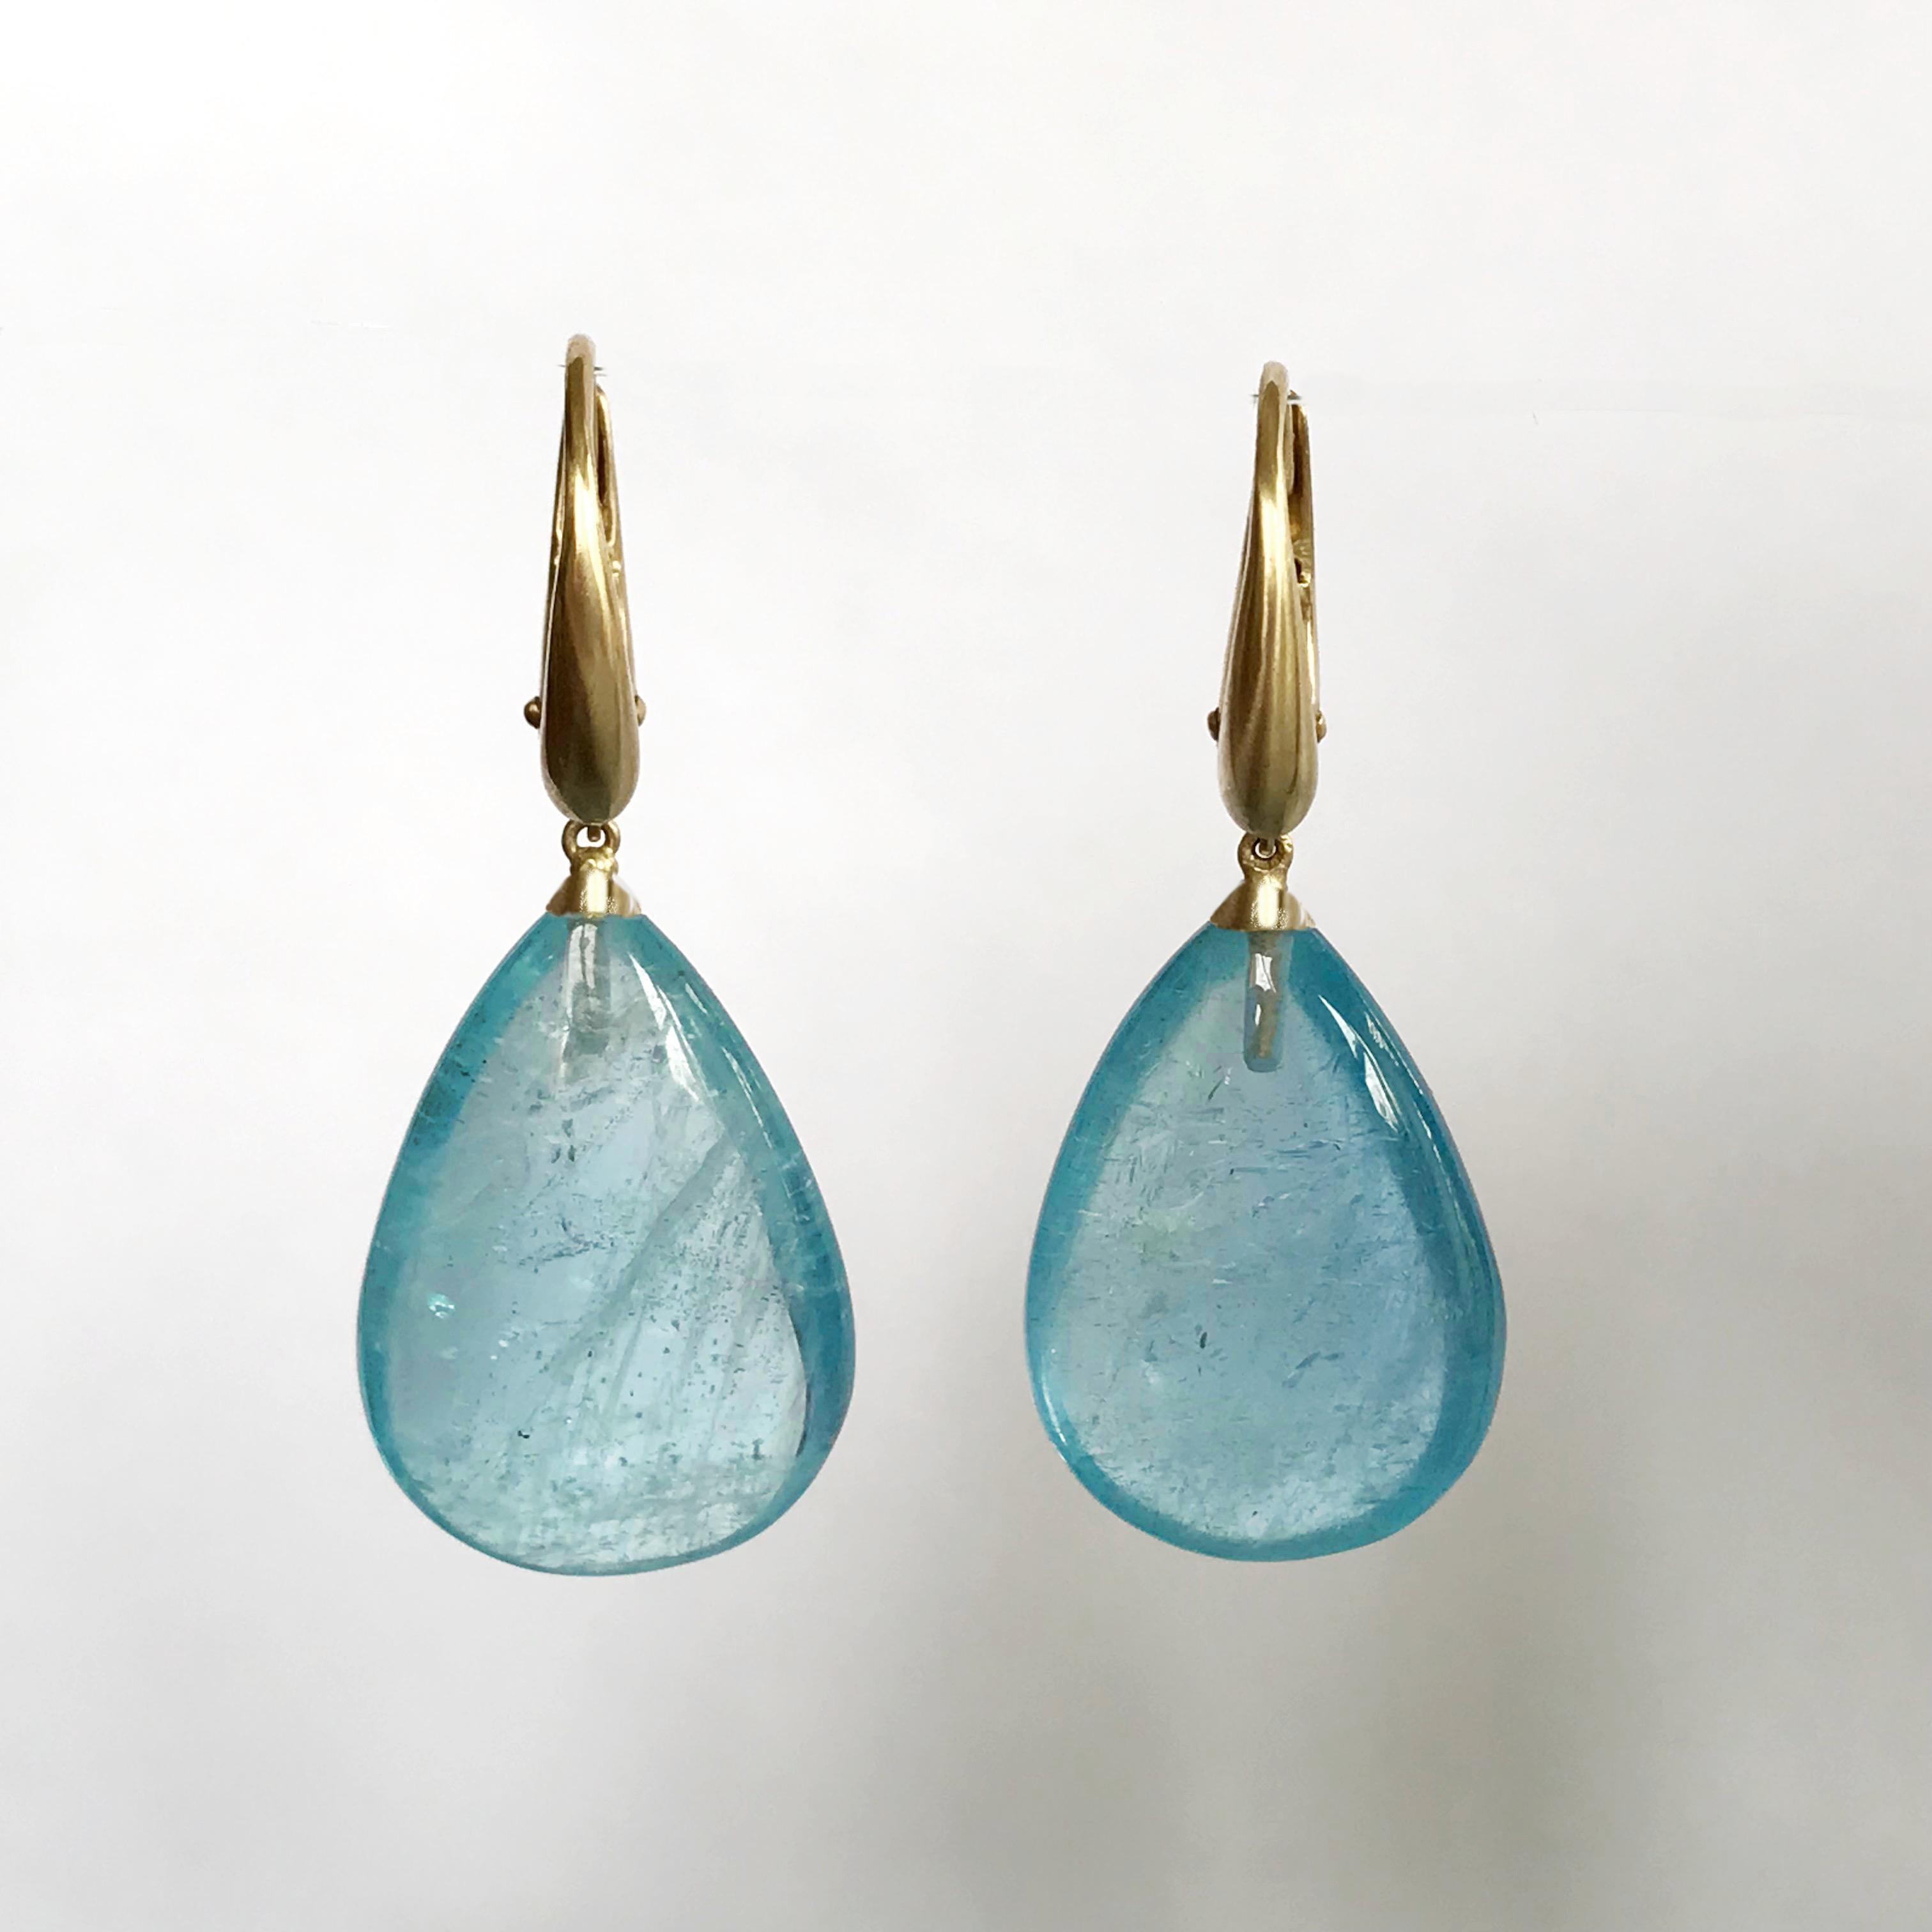 Dalben design 18 kt semi-lucid finished yellow gold earrings with two drop shape Aquamarine circa 15 x 21 mm weight 33,2 carat . 
Earrings dimension : 
width 15 mm 
height with leverback 38 mm 
The earrings has been designed and handcrafted in our